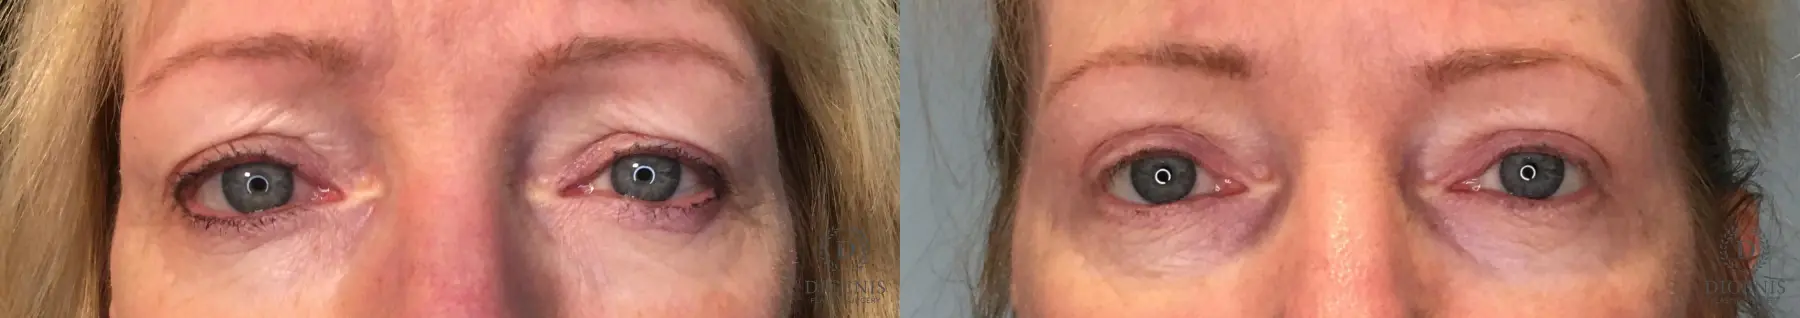 Eyelid Surgery: Patient 34 - Before and After 1